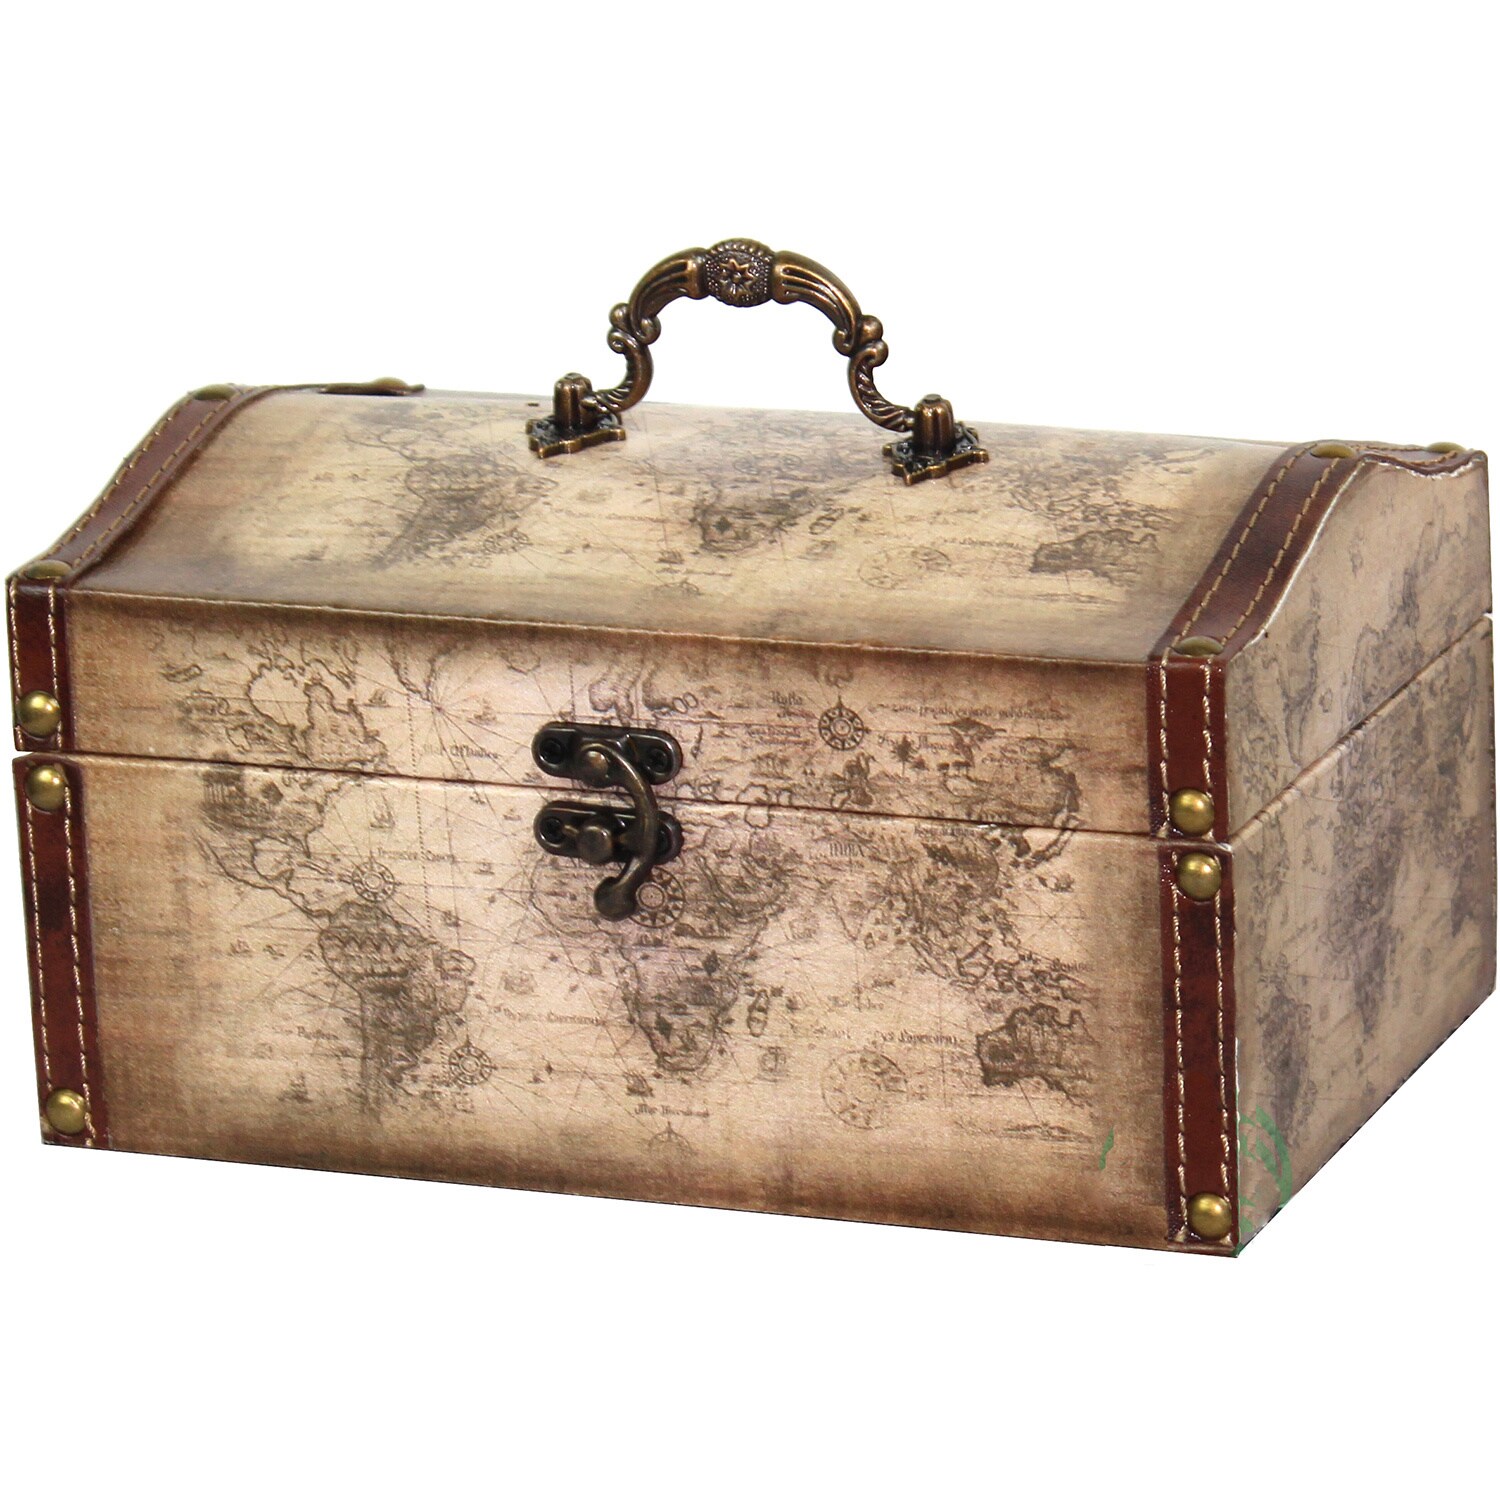 Set of 2/ Decorative Treasure Chest / Ganzoo Antique Maps Style Leather Coated Wooden Box for Storage and Small Parts/ 